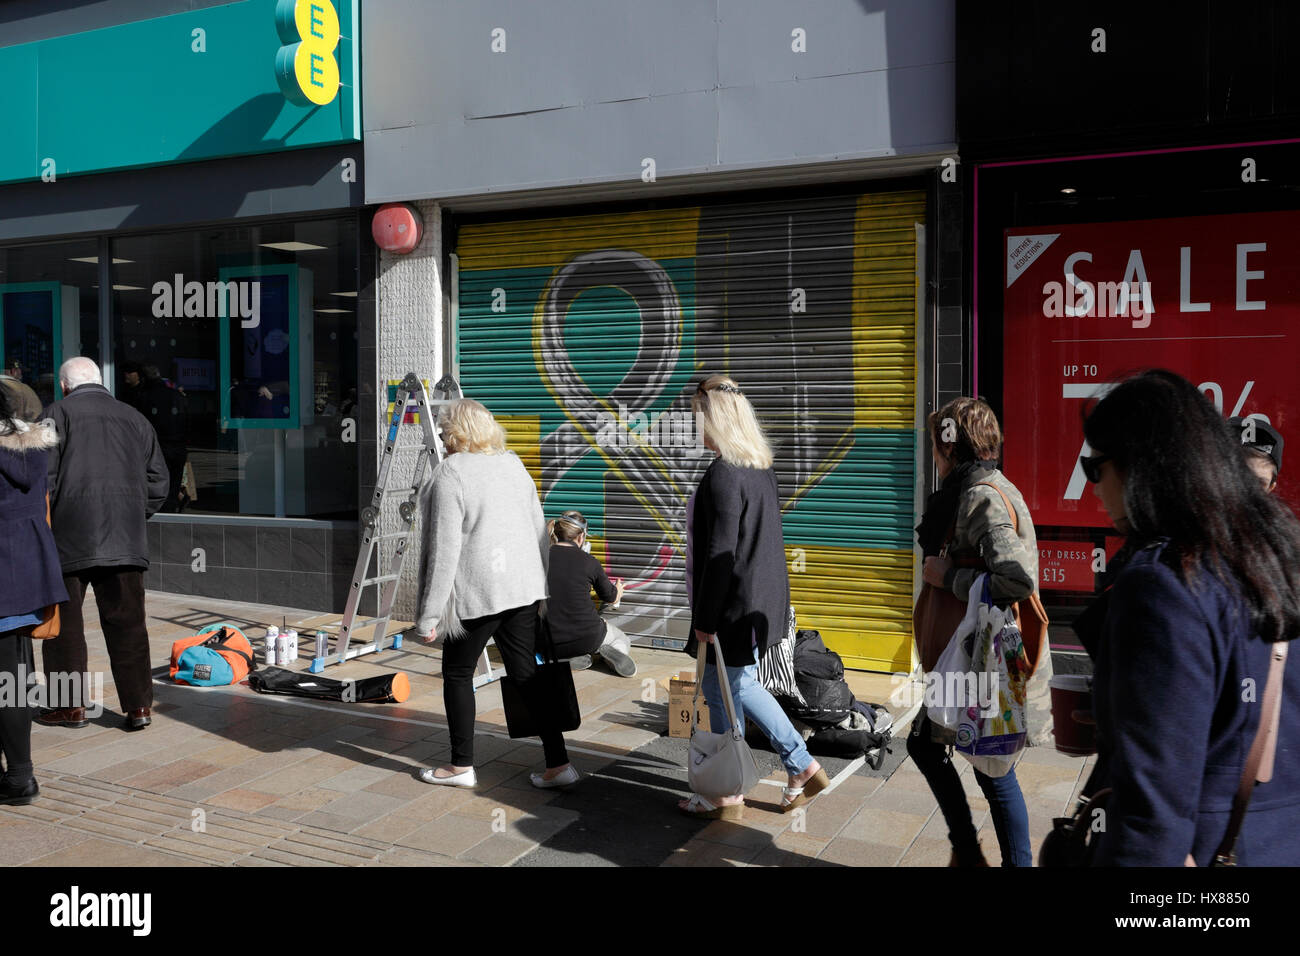 People walk past a street artist spray painting art on a closed shop shutter in Sheffield city centre England UK Stock Photo